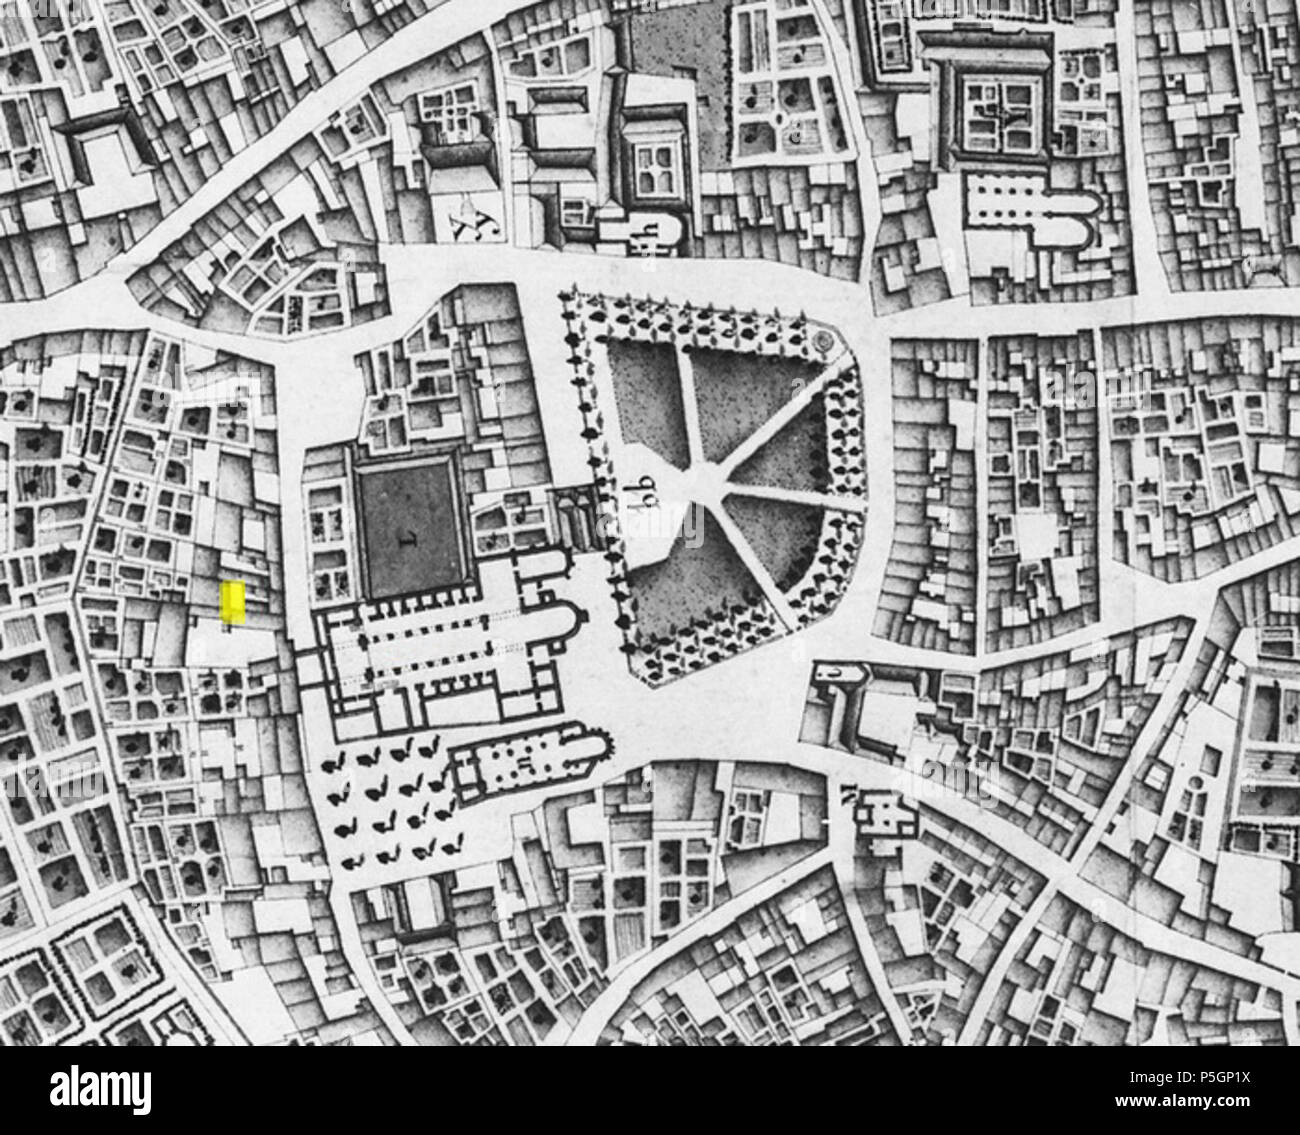 N/A. English: Location (marked in yellow) of the 2009-2010 small-scale archaeological excavation at Sint Servaasklooster 14, Maastricht, the Netherlands. Based on a 1749 map by French military engineer Jean-Baptiste Larcher d'Aubencourt, used to build the Maquette of Maastricht. 29 August 2016, 18:28:00. Jean-Baptiste Larcher d'Aubencourt, 1749 23 1749LarcherDAubencourt, Vrijthofopgravingen 37 Stock Photo